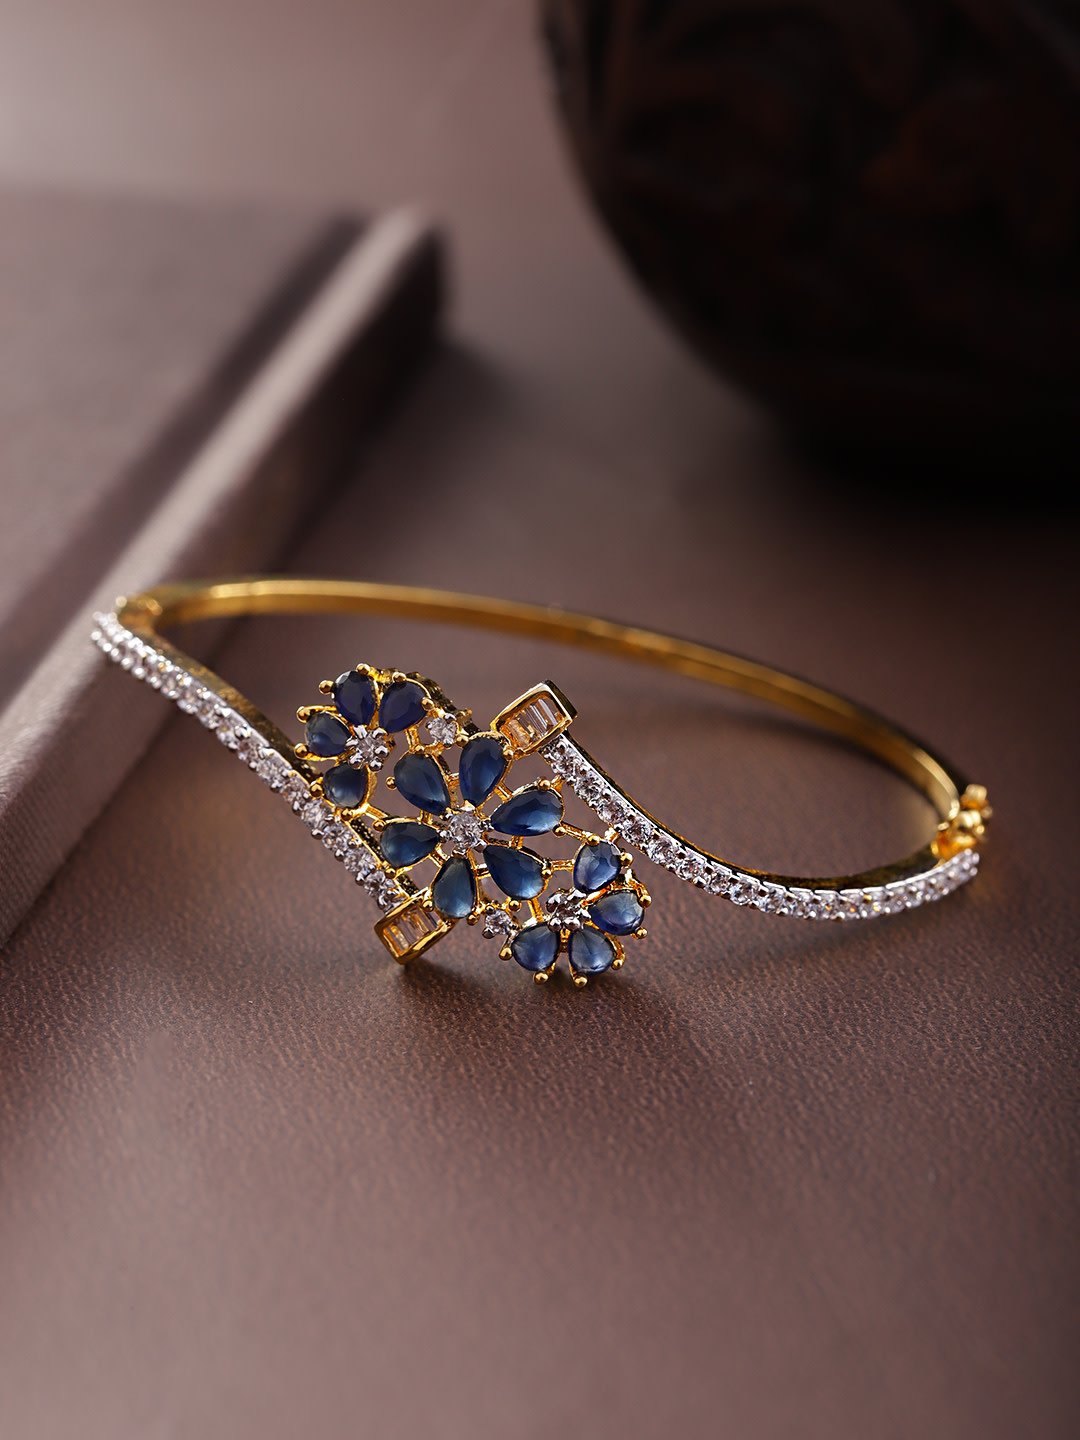 Women's Gold-Plated American Diamond Studded, Floral Patterned Bracelet in Blue Color - Priyaasi